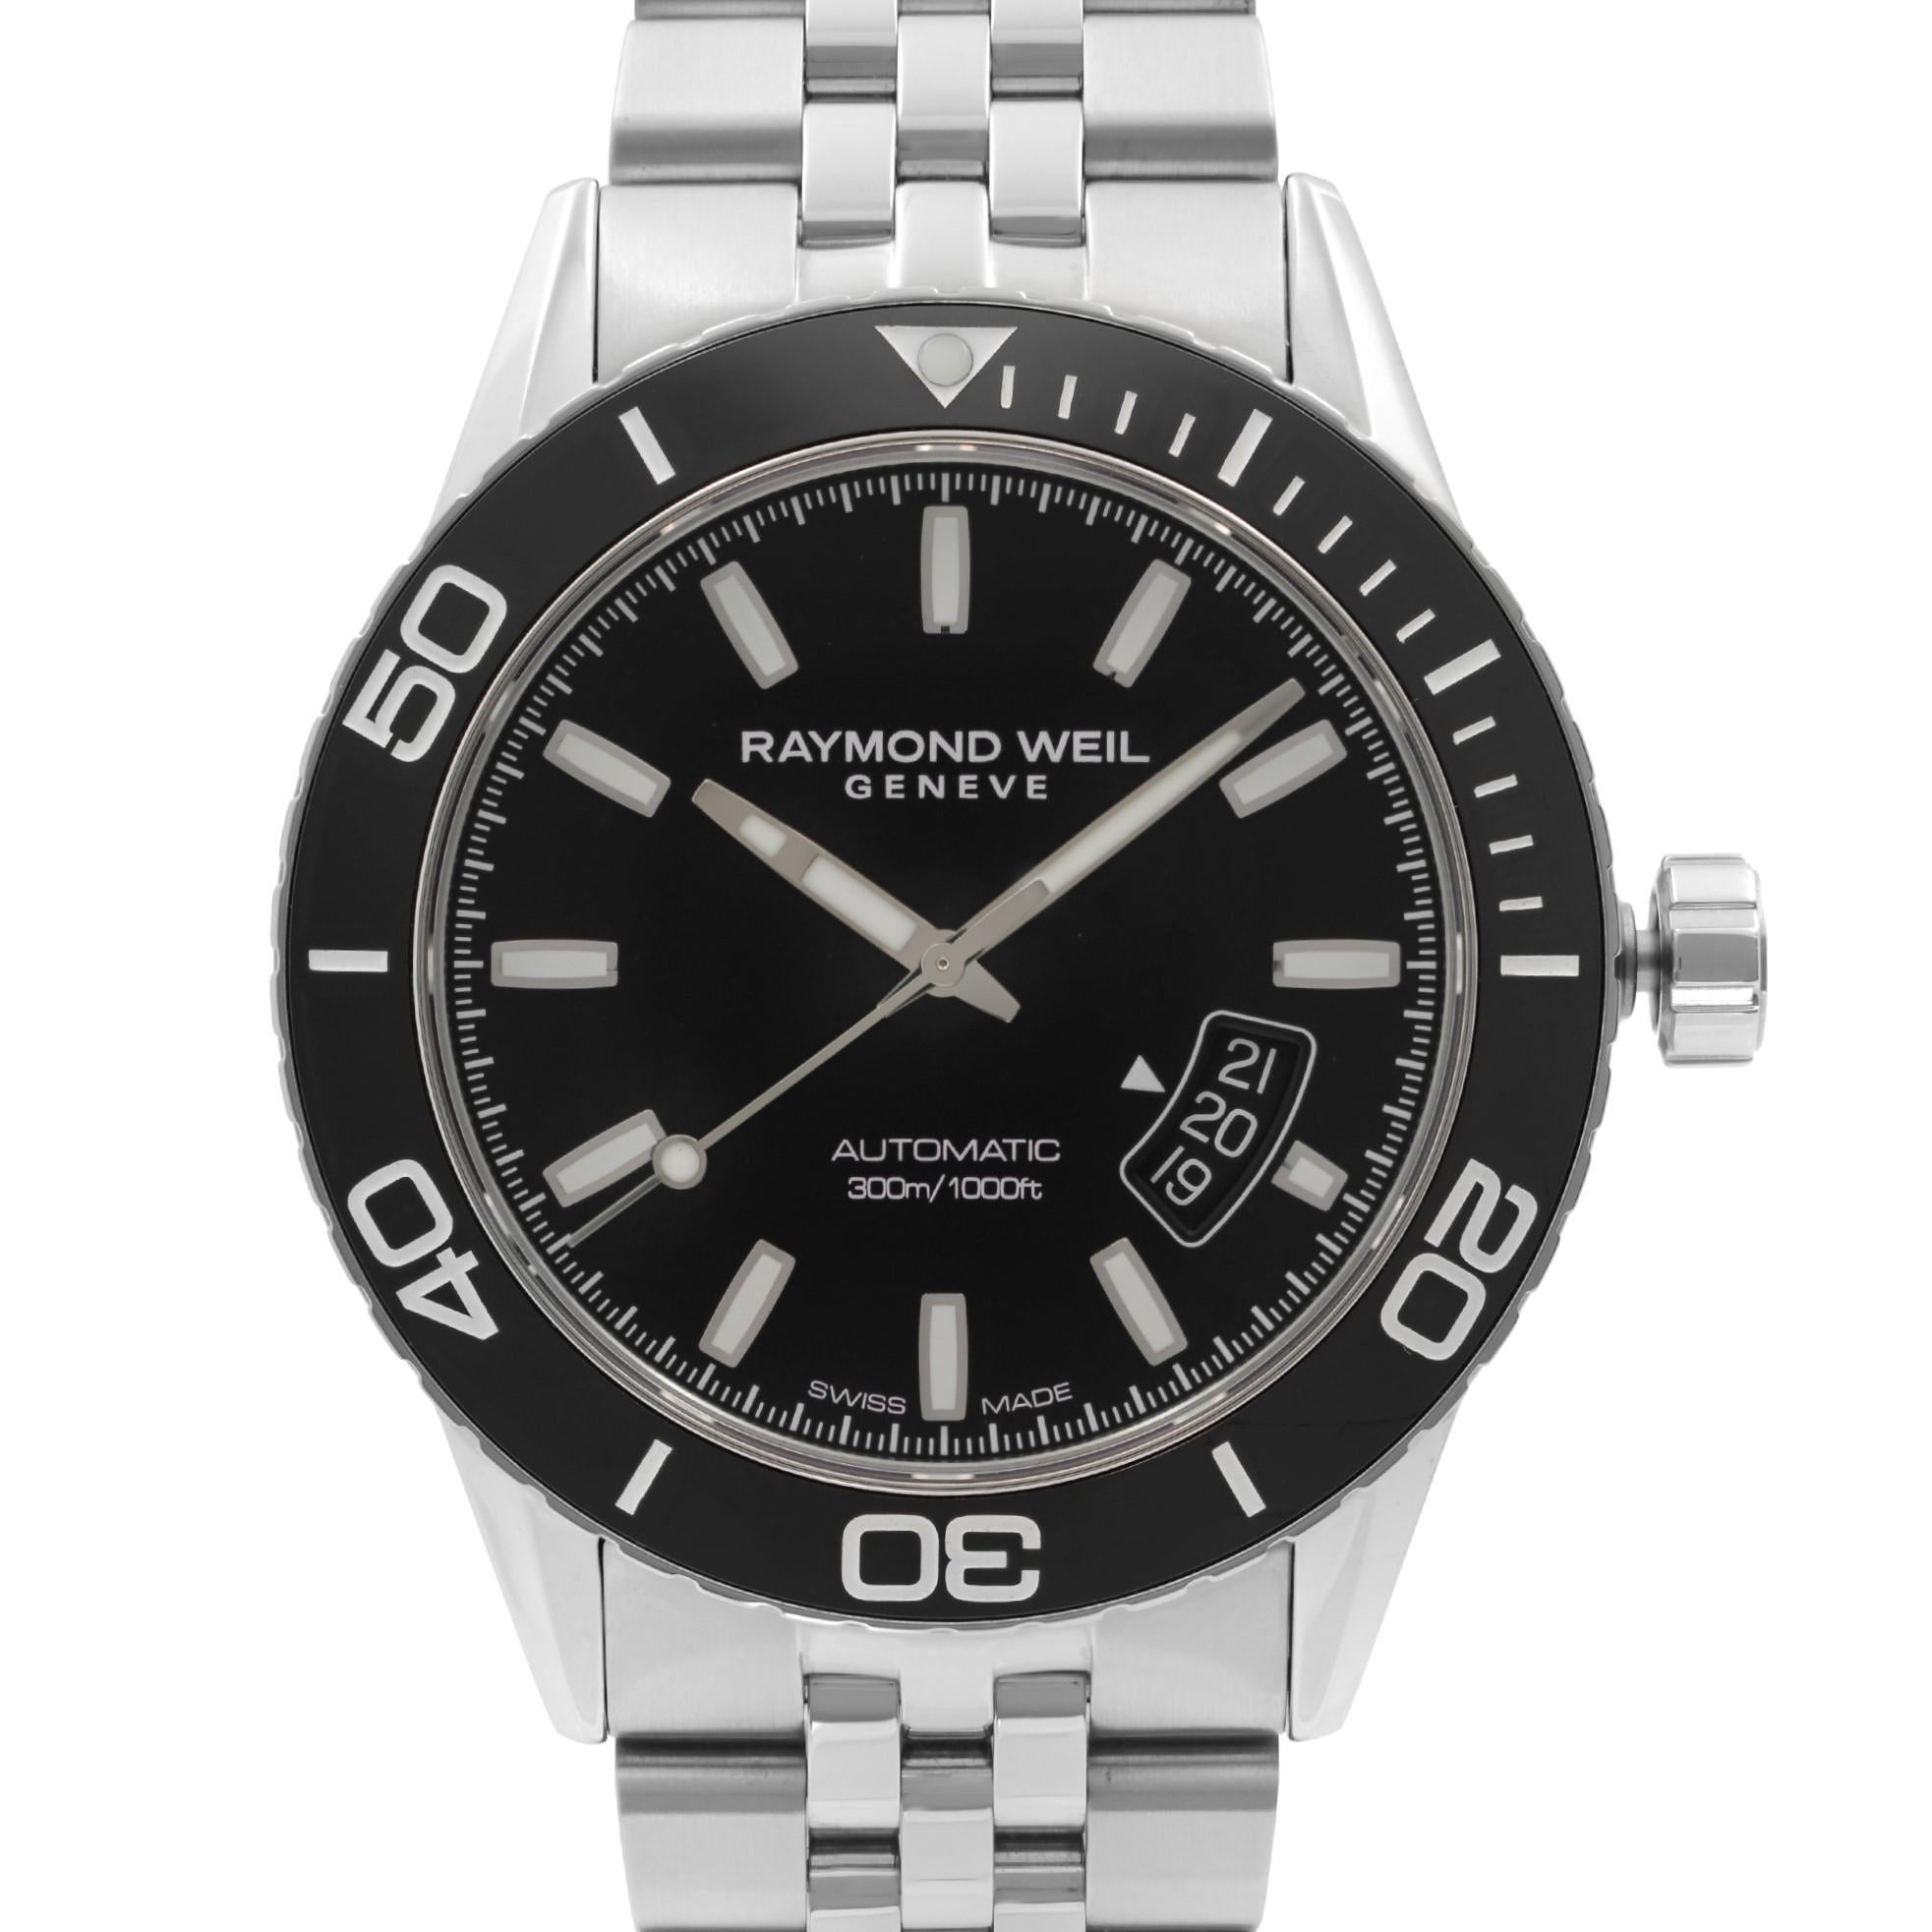 Never Worn Raymond Weil Freelancer Steel Black Dial Automatic Men's Watch. This Beautiful Timepiece Features: Stainless Steel Case and Bracelet, Uni-Directional Coin Edge Stainless Steel Bezel with a Black Ceramic (Count-up Elapsed Time) Ring, Black